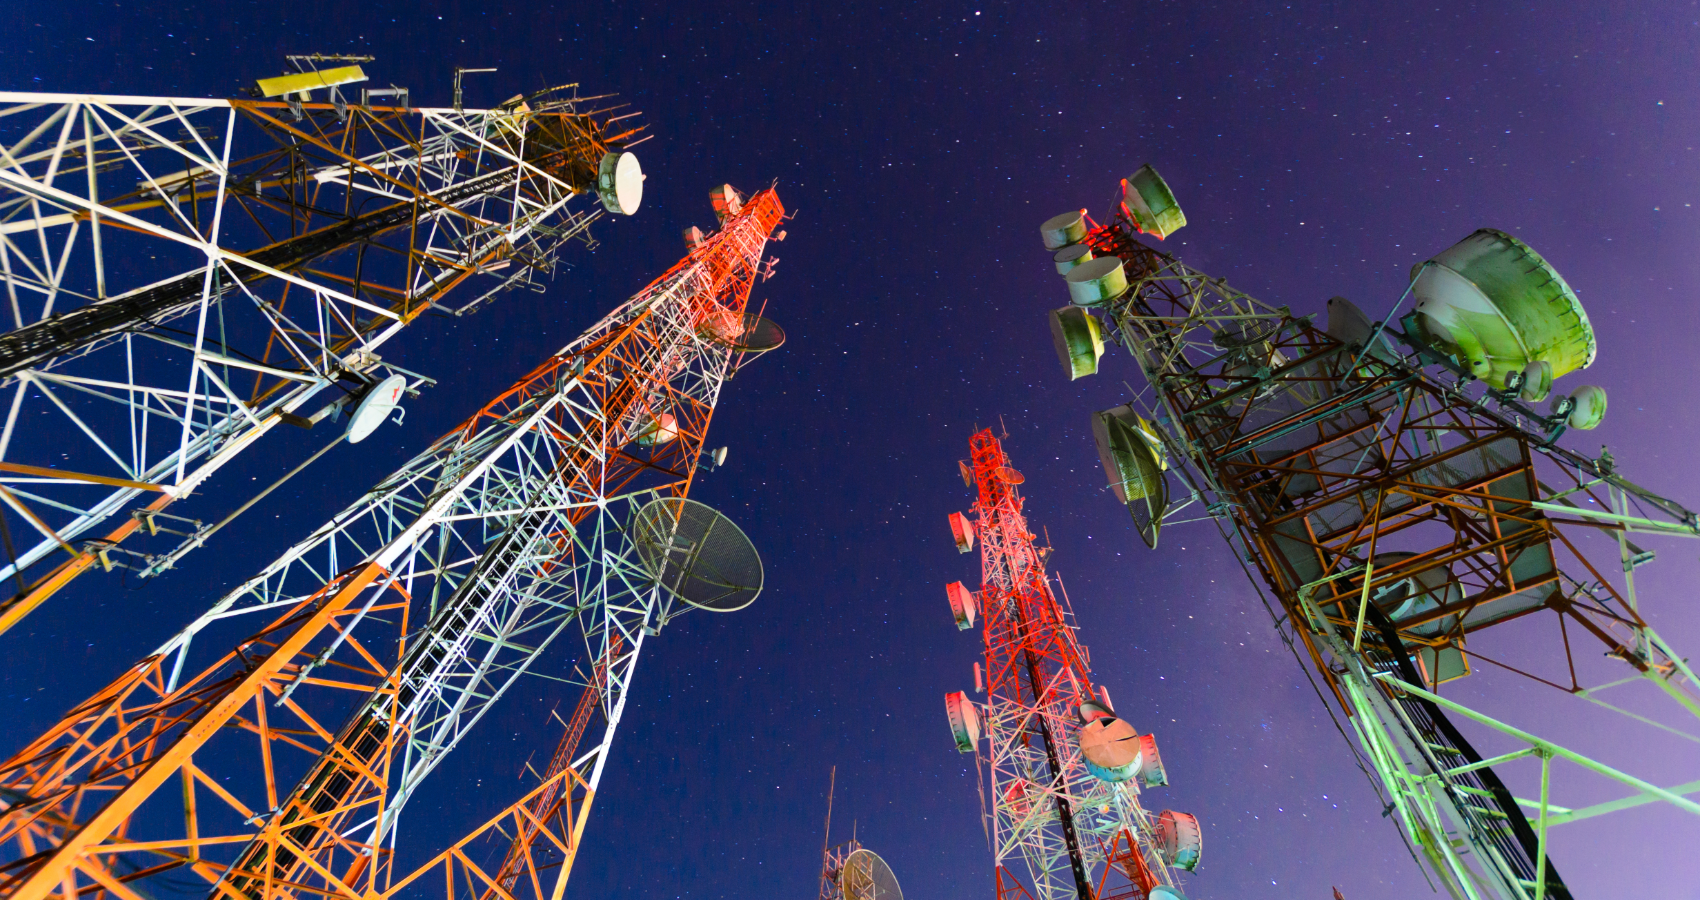 The sky at night with communication towers